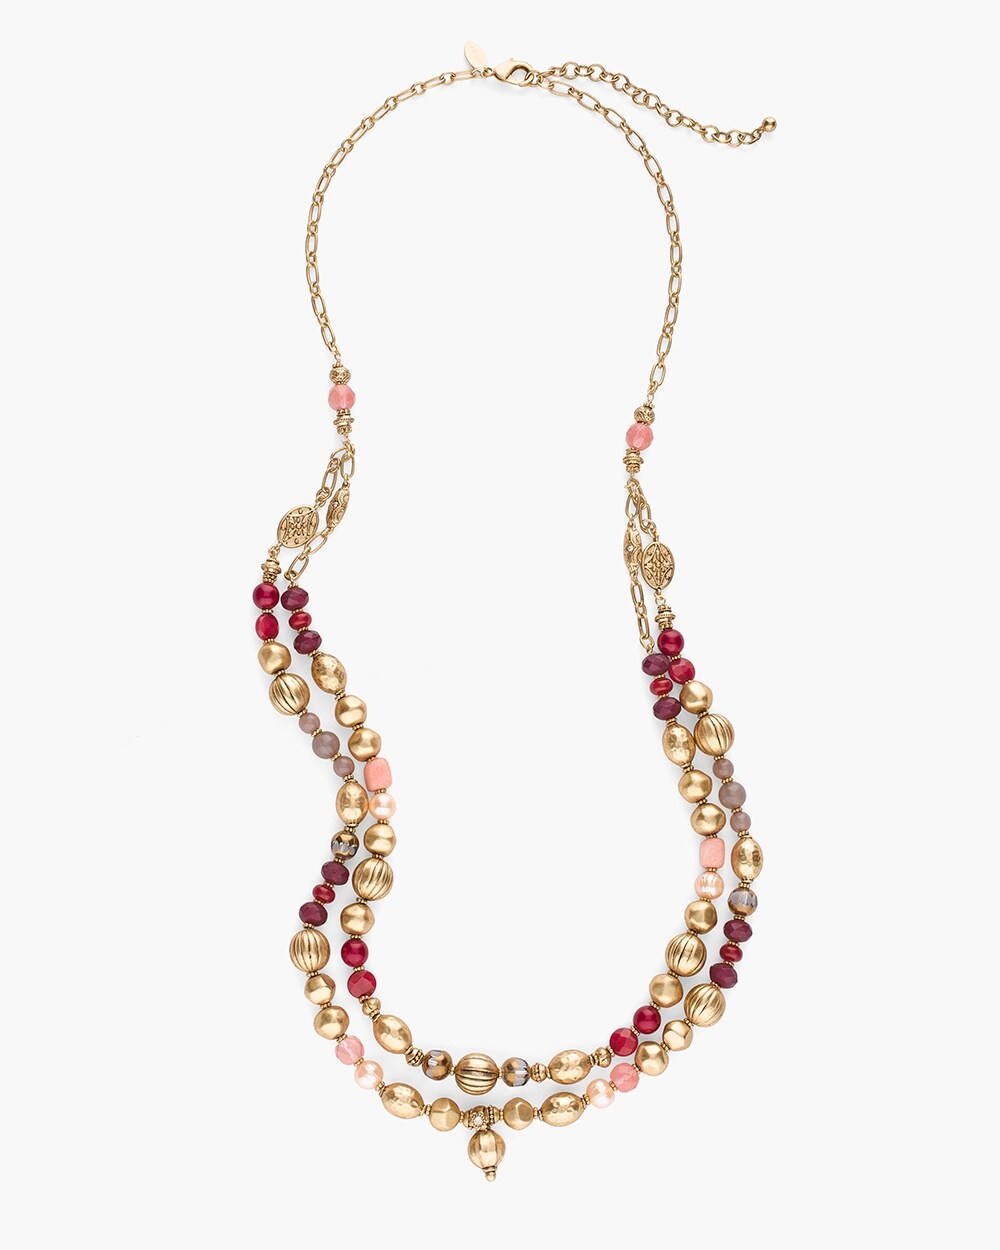 Pink and Merlot Double-Strand Necklace